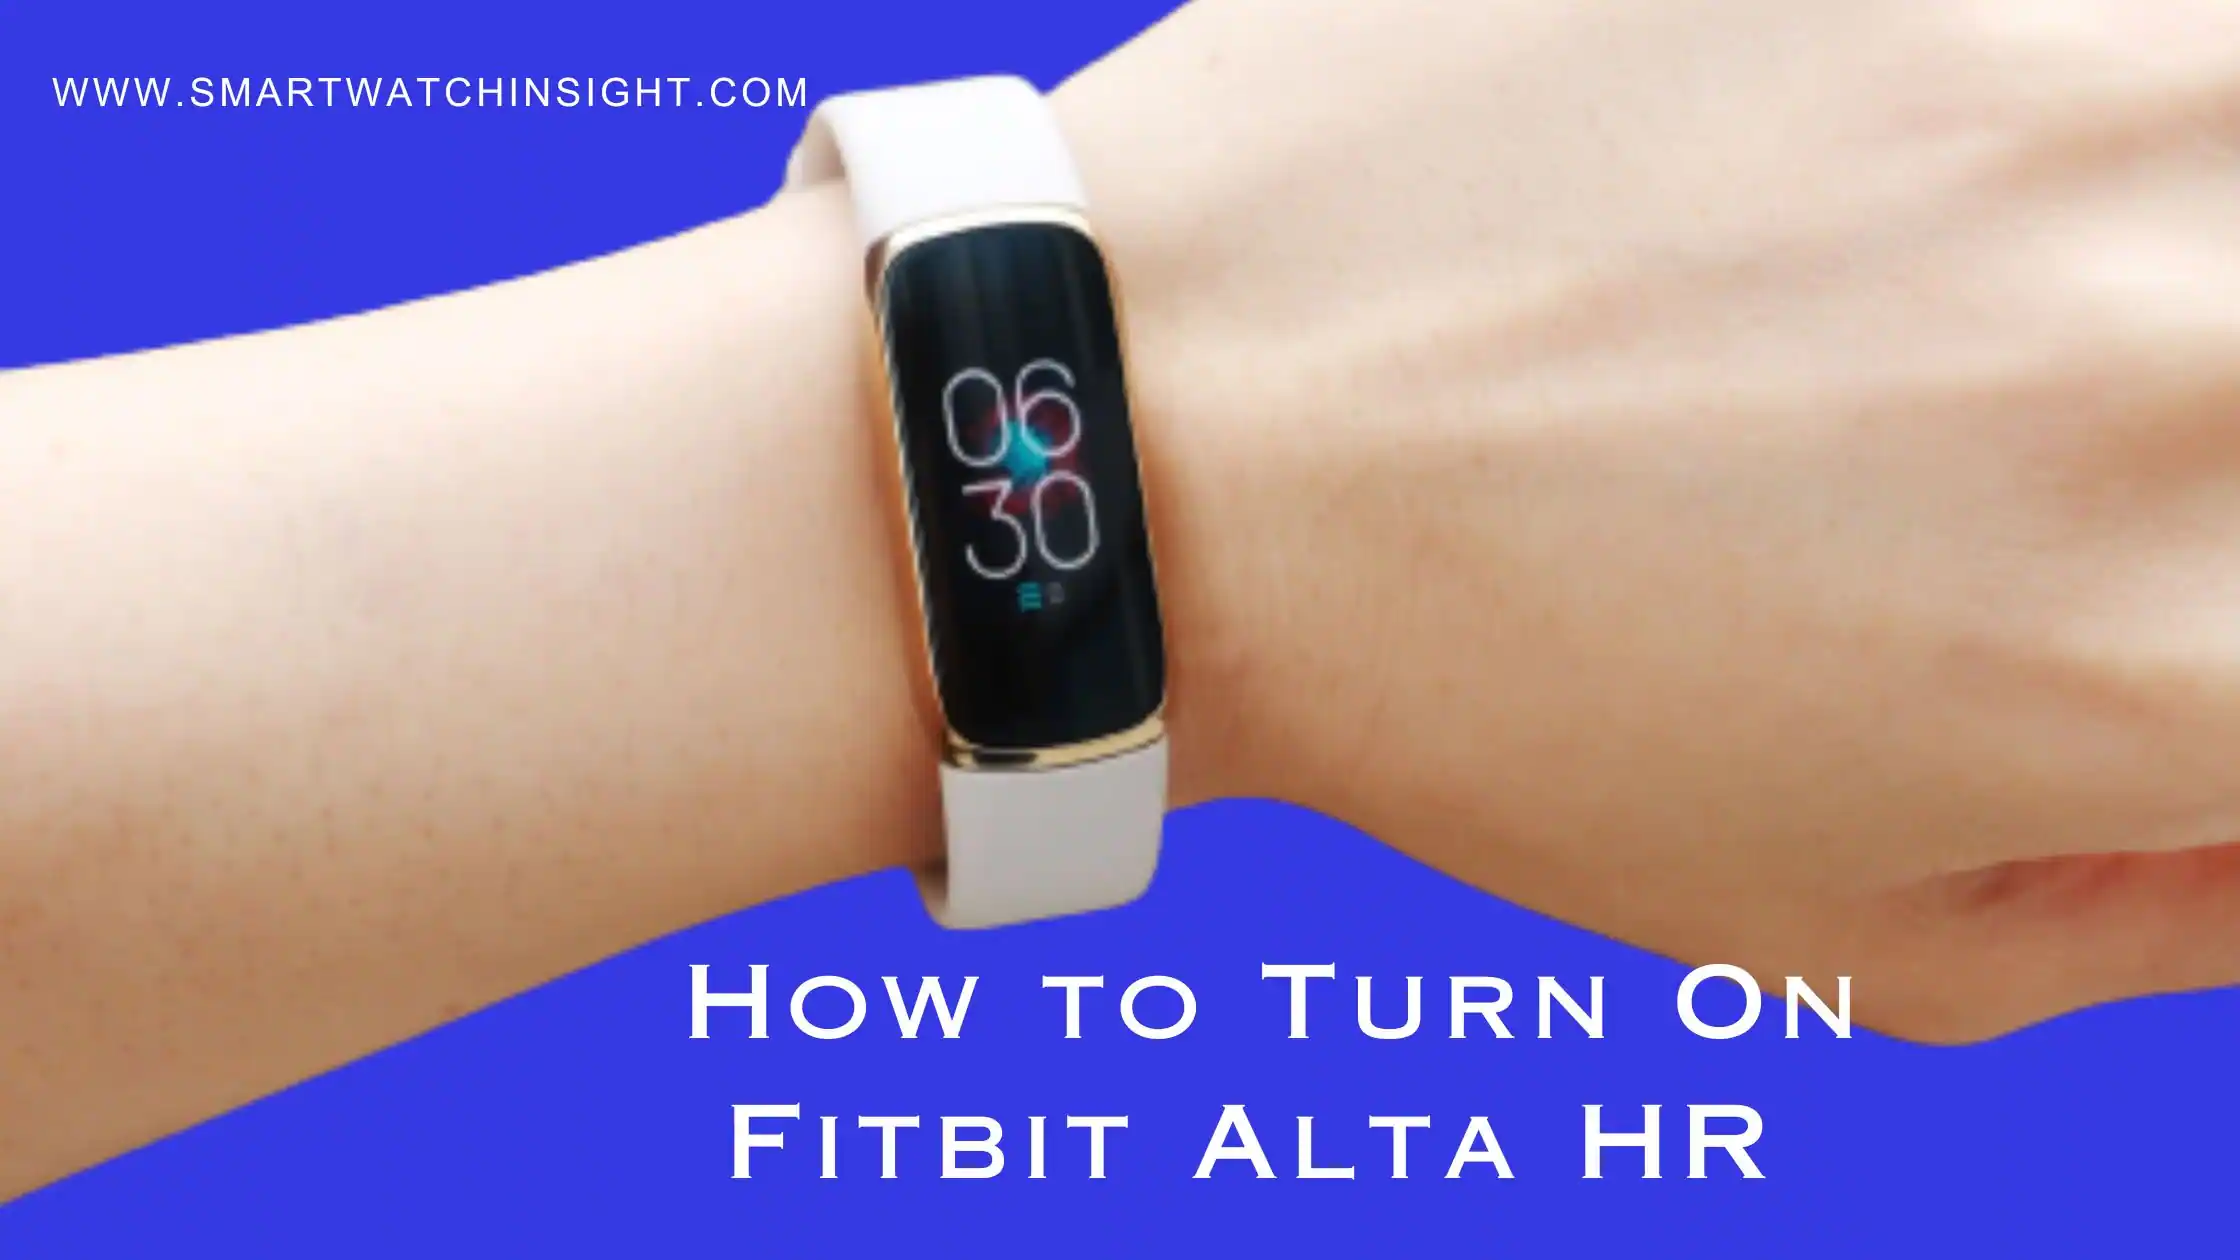 How to Turn On Fitbit Alta HR